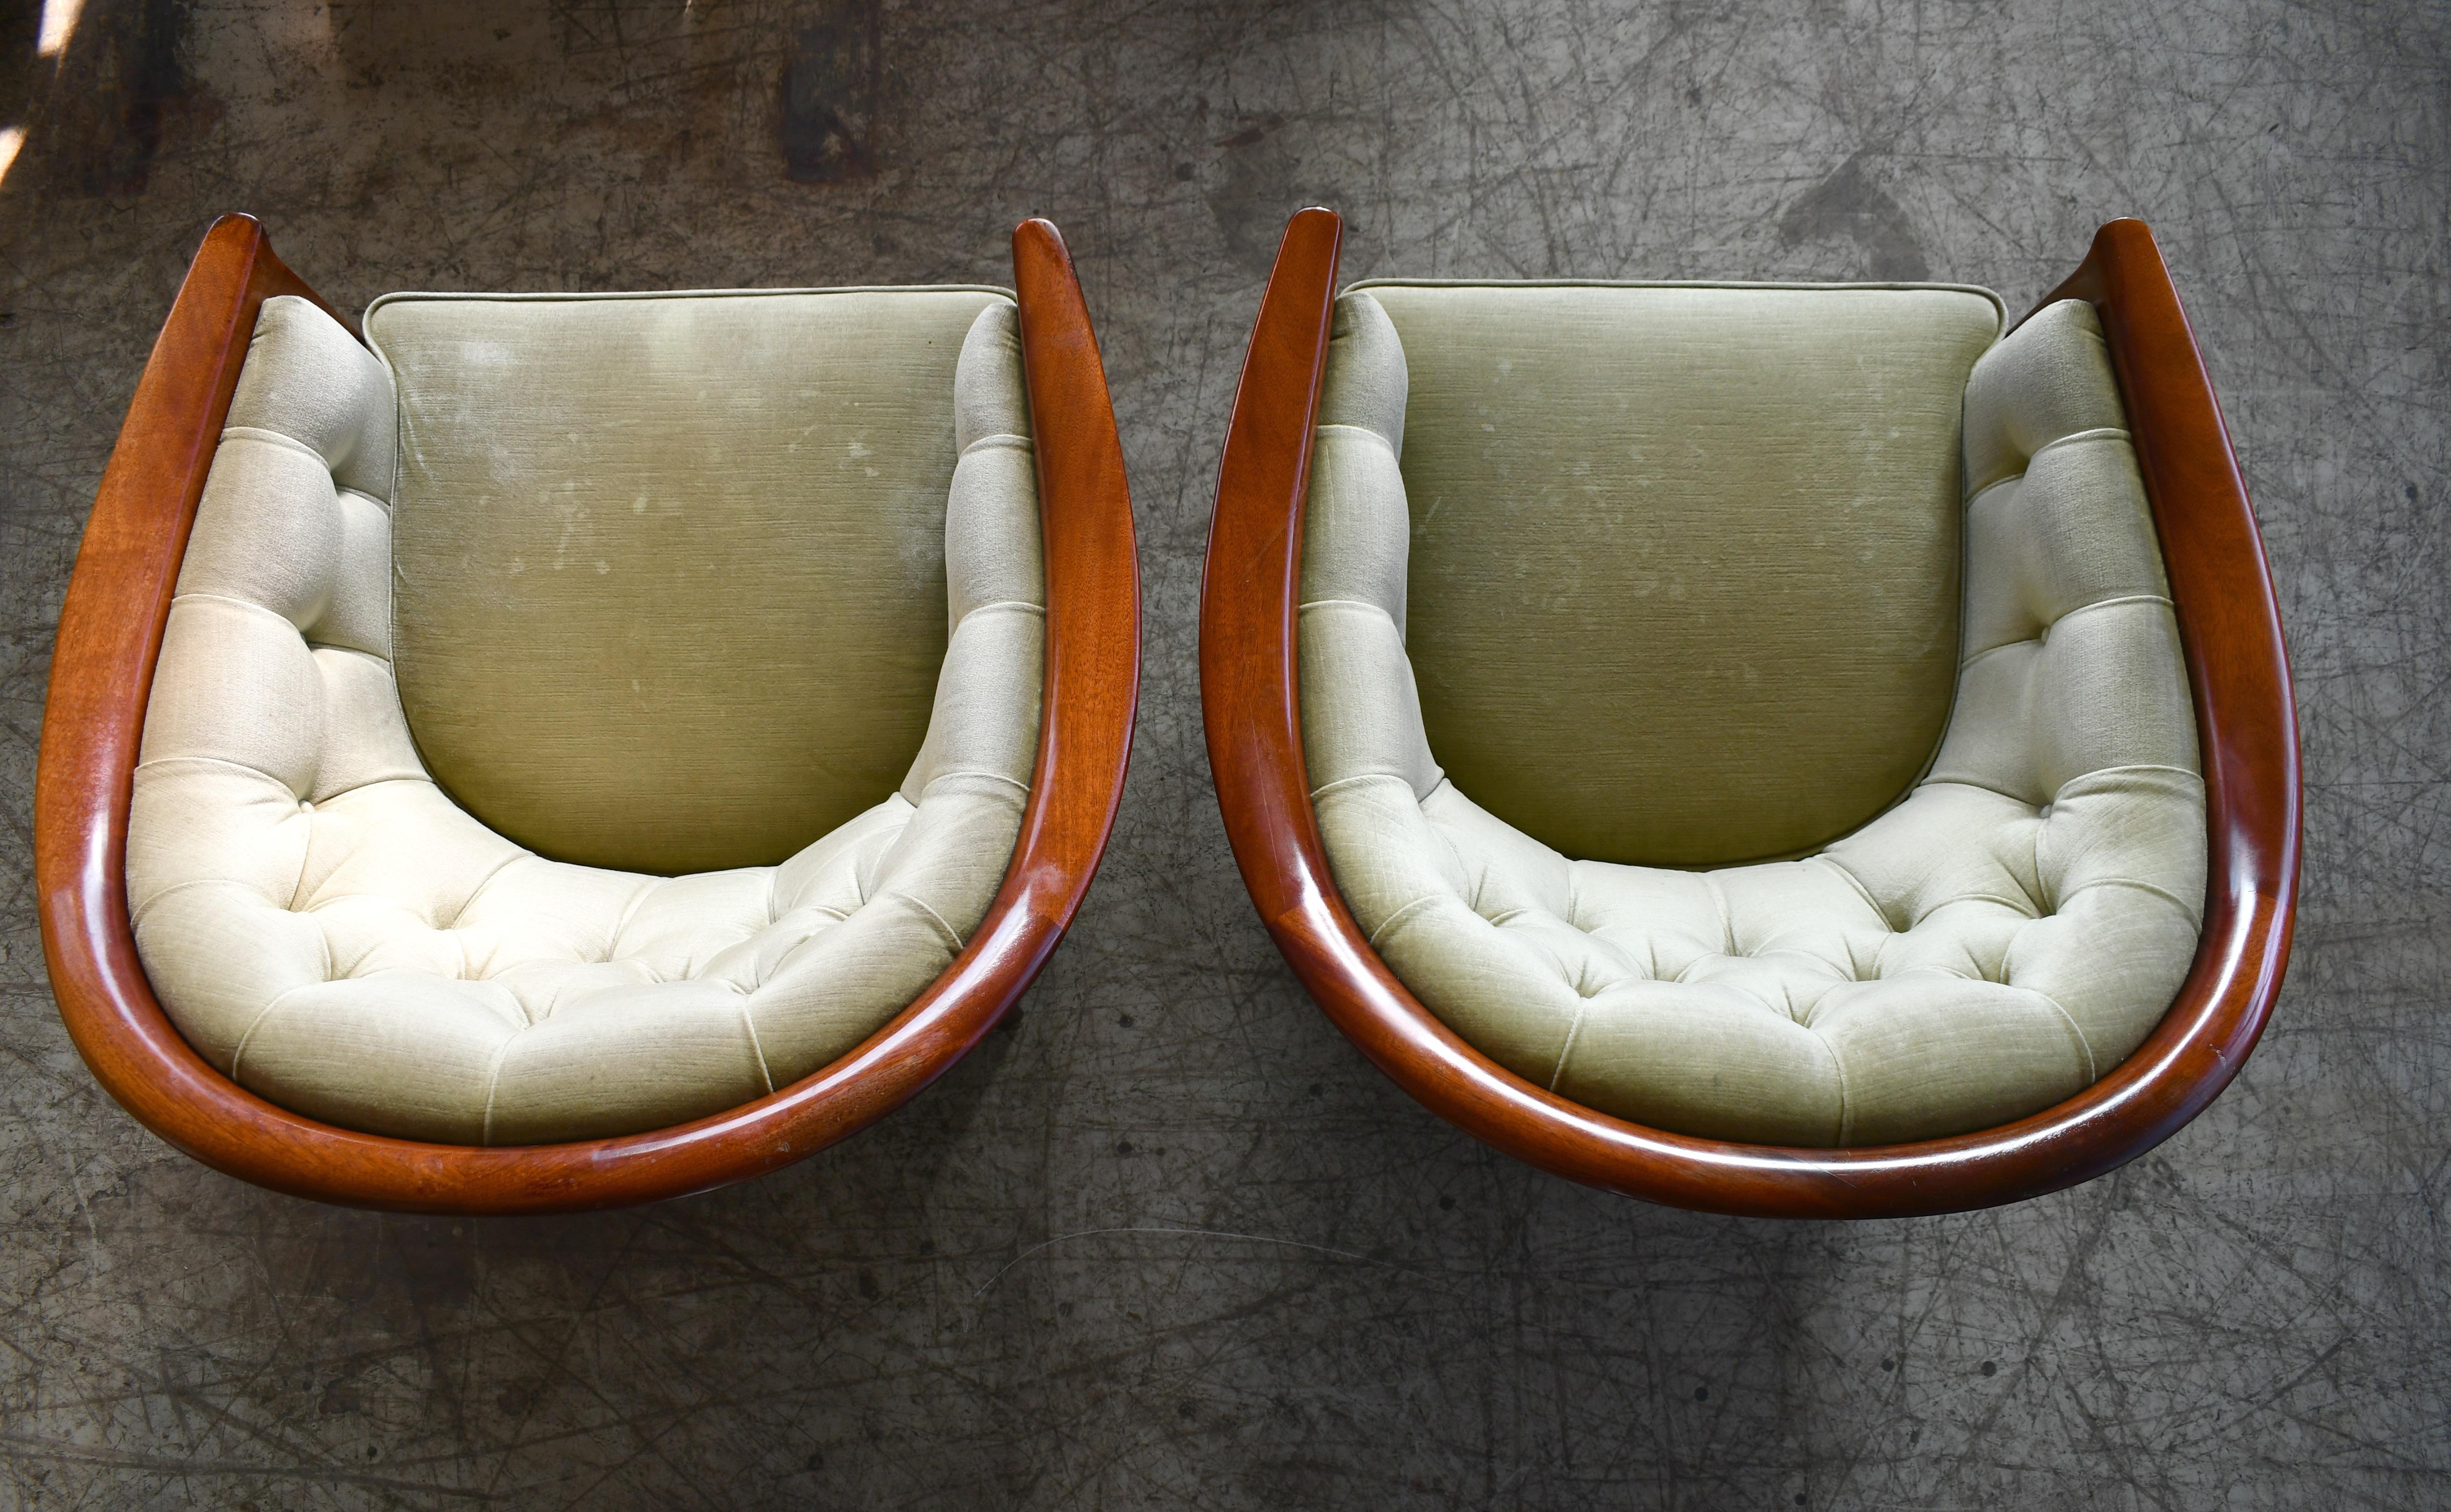 Pair of Midcentury Lounge Chairs Model 